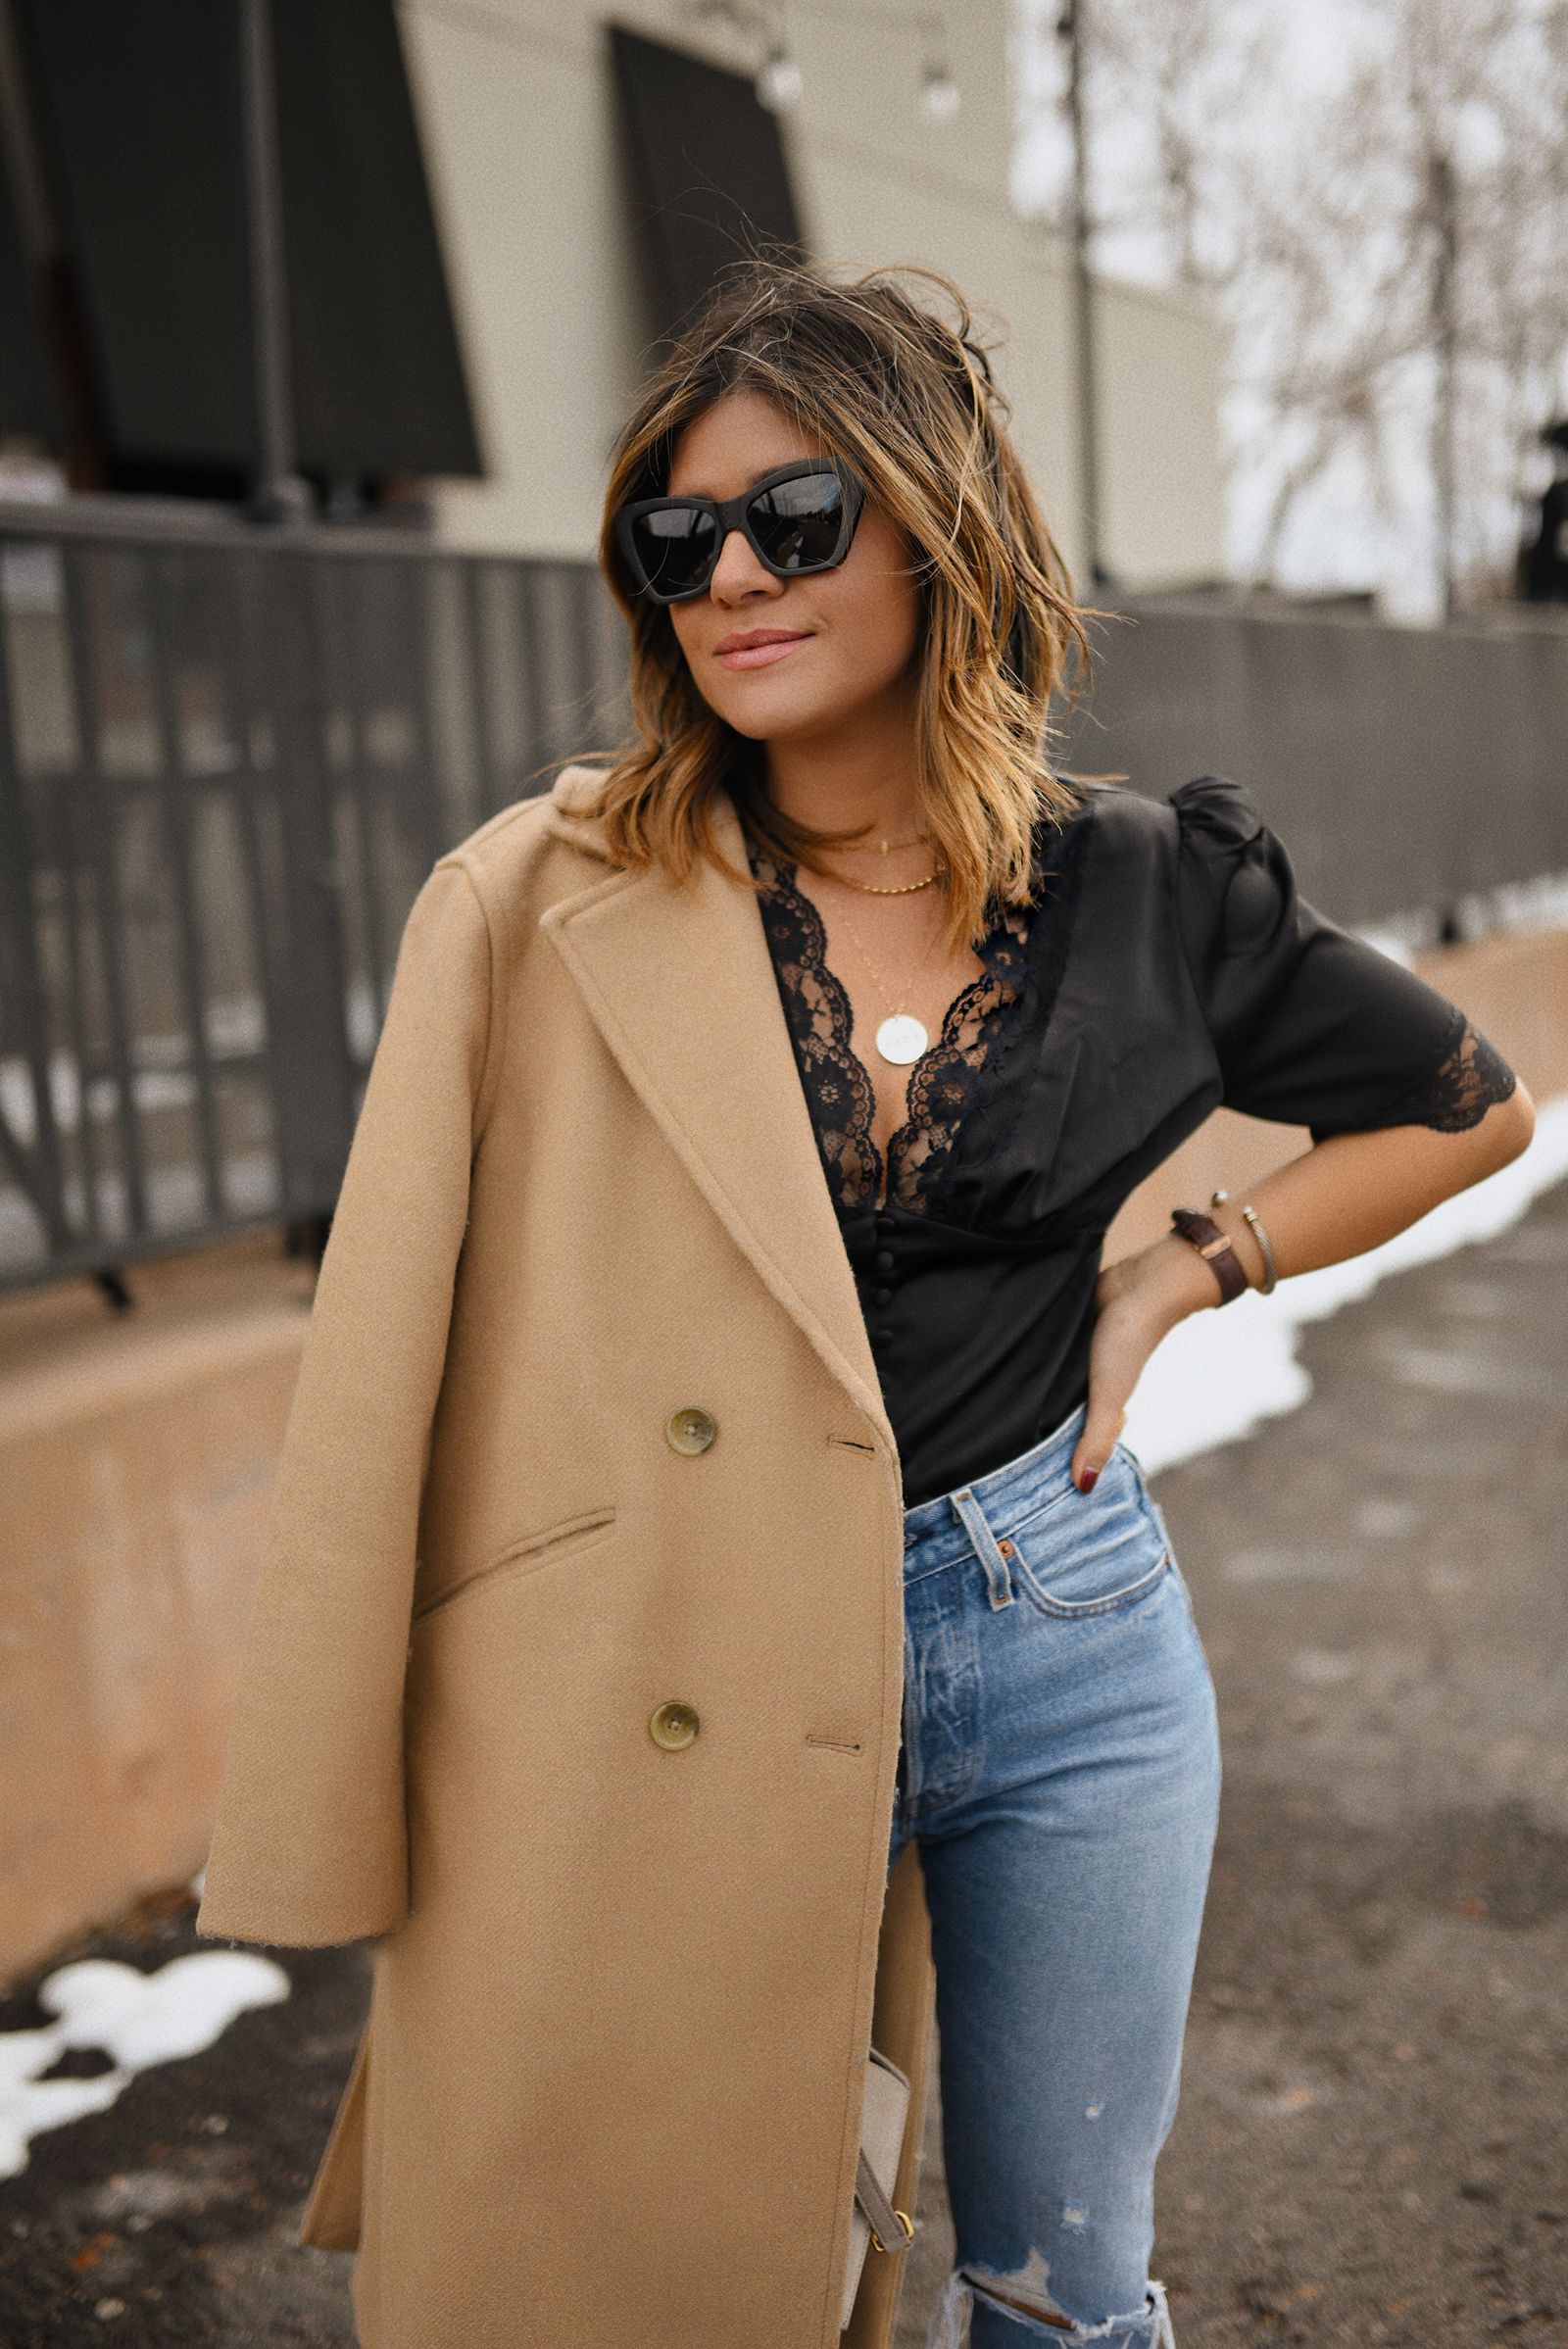 Carolina Hellal of Chic Talk wearing a WAYF black top with lace trims, Levi's 501 skinny jeans, Vince Camuto suede booties and Everlane camel coat. 